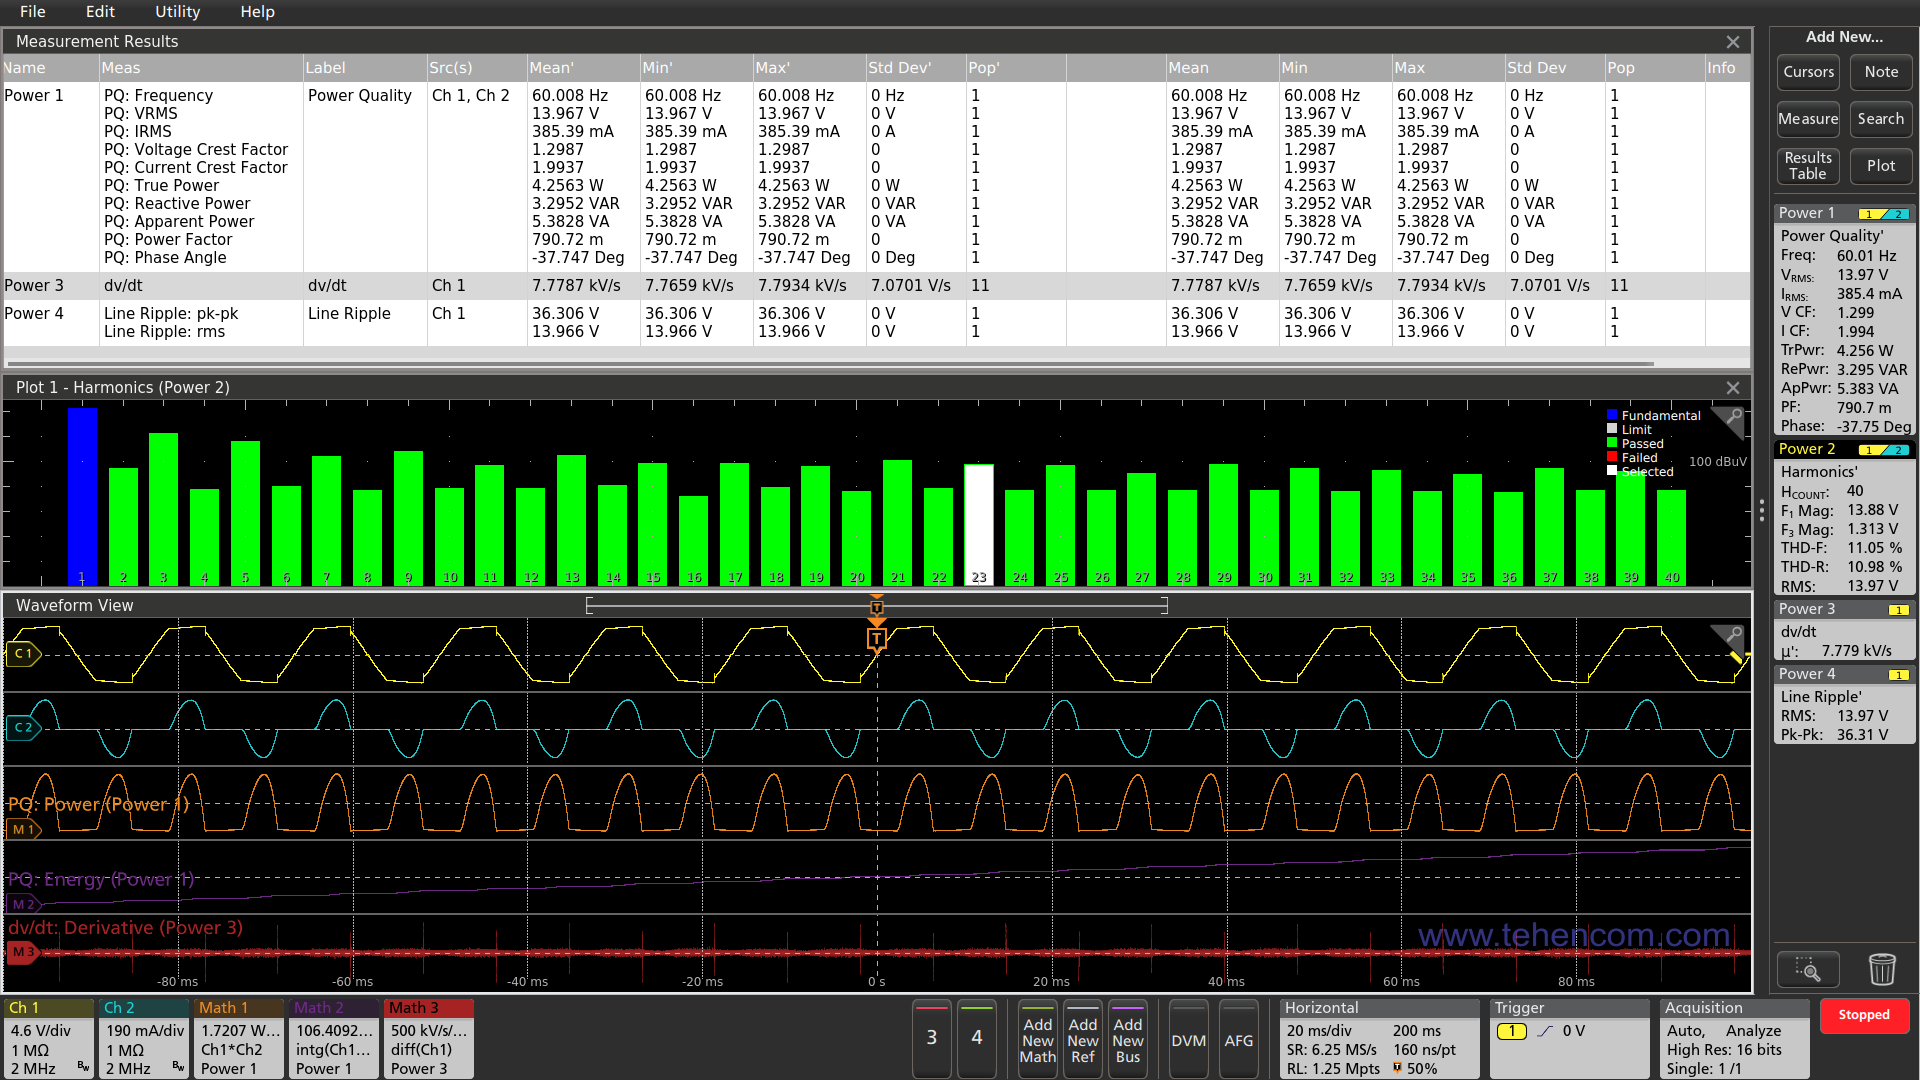 Tektronix MSO6 oscilloscopes with 6-PWR option provide advanced analysis of power components and power supplies